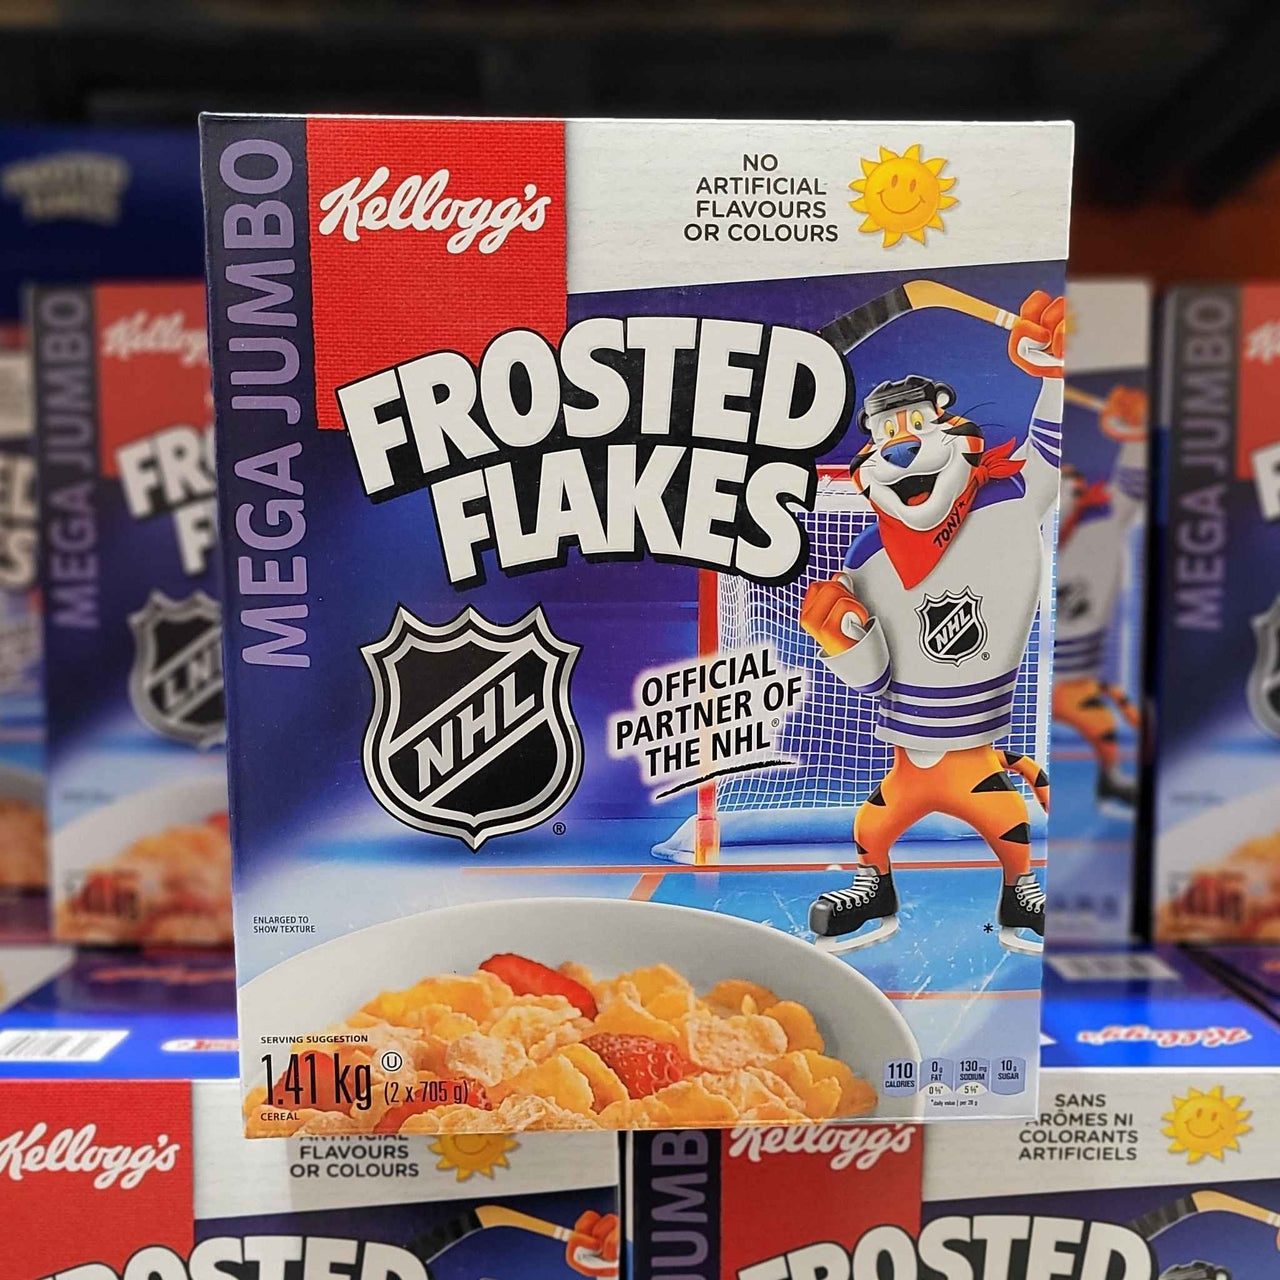 Kellogg's Frosted Flakes Cereal 1.41kg Shipped to Nunavut – The